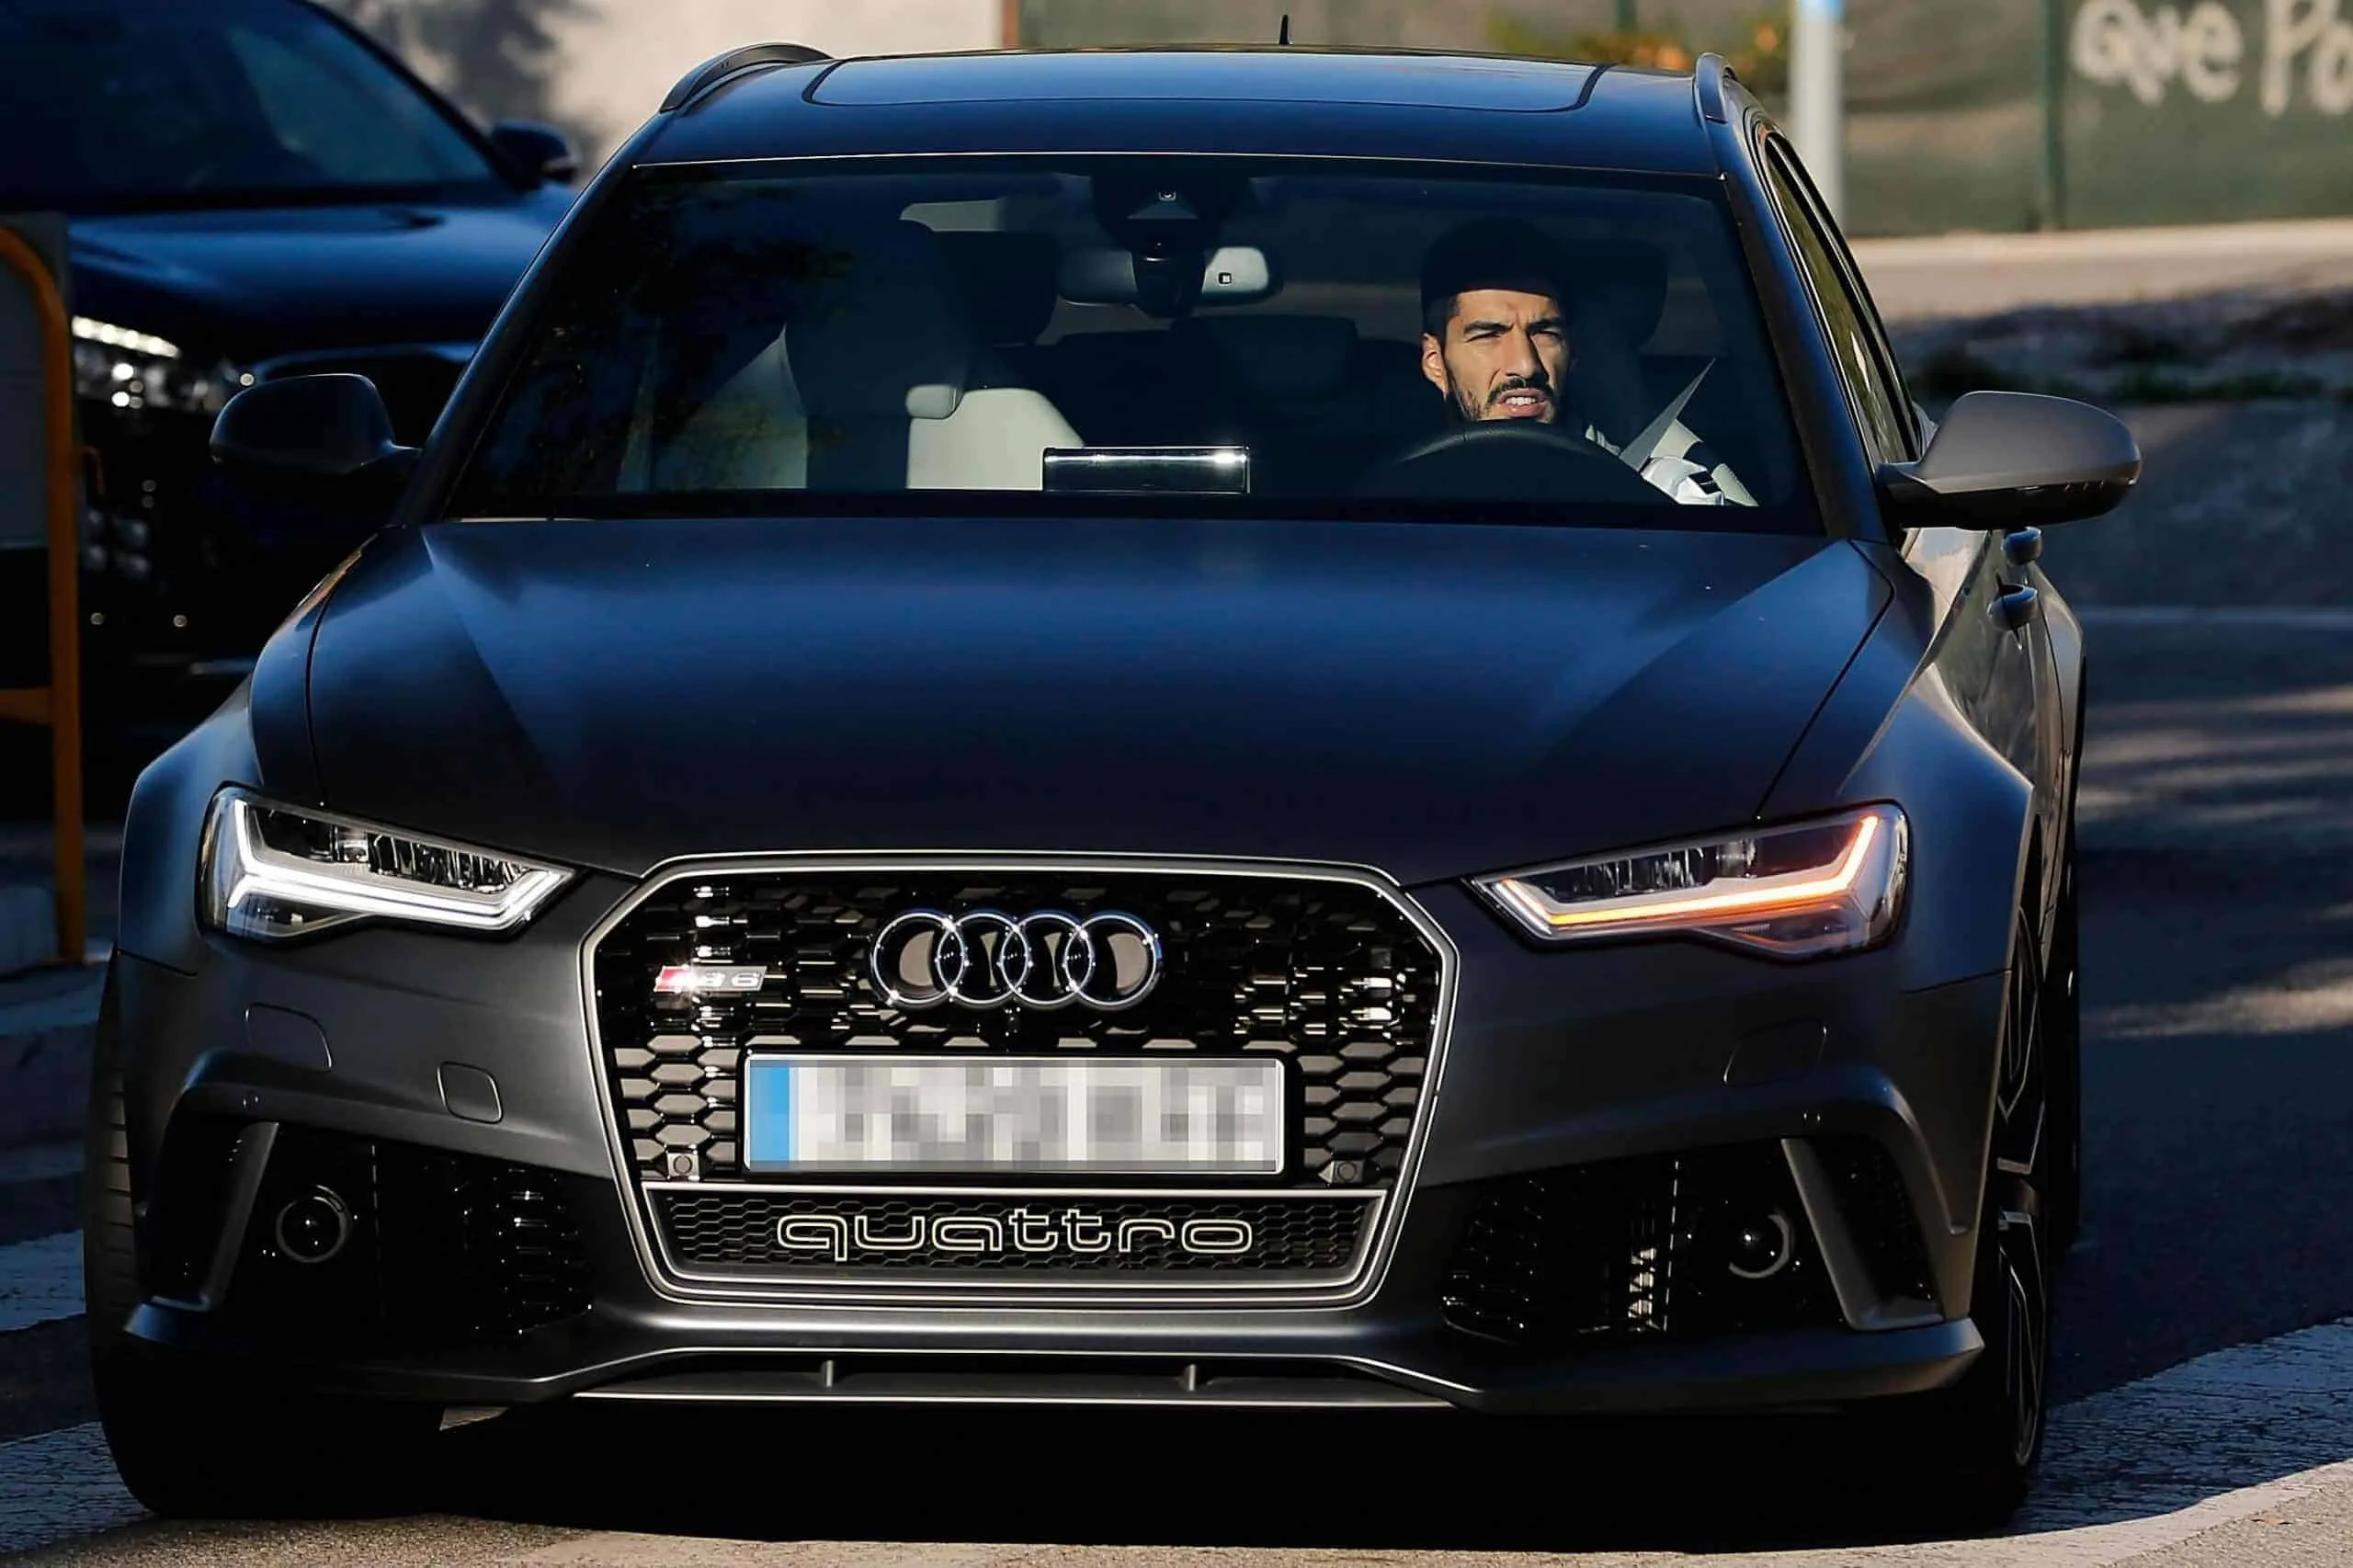 Suarez has different versions of Audis in his cars collections. Credits: YallaMotor.